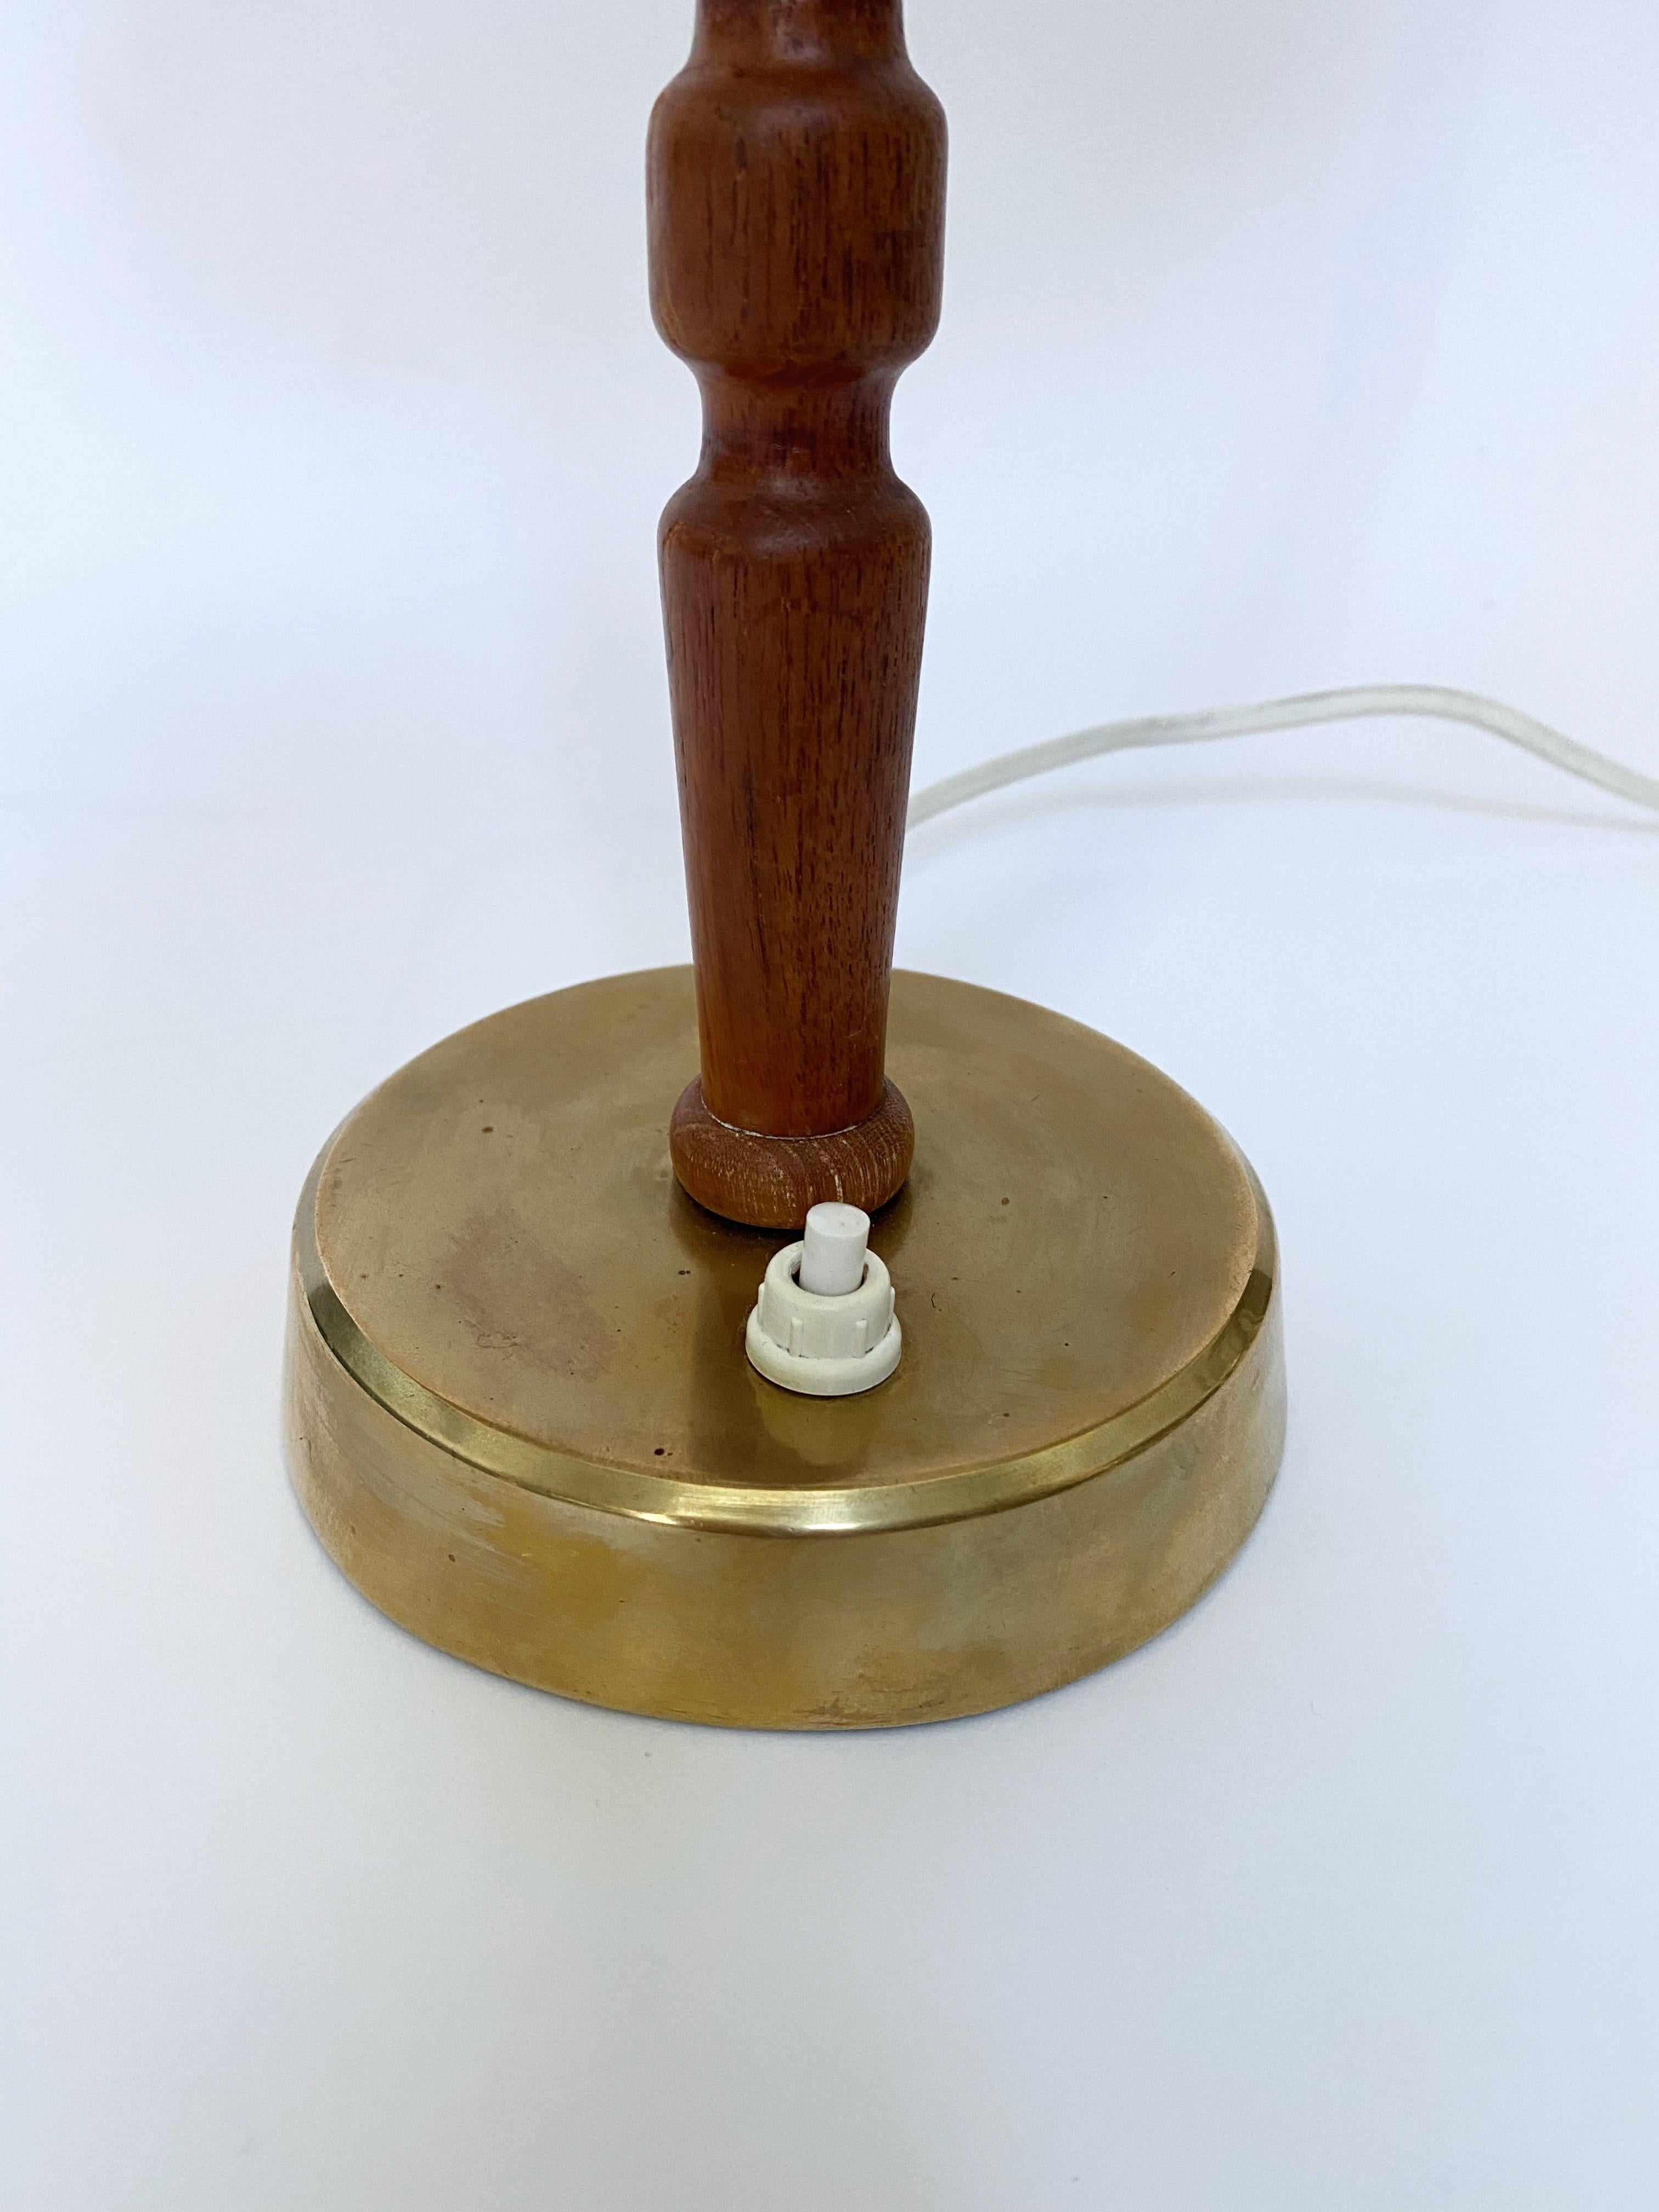 Rare Table lamp model 743 by Hans Bergström for Ateljé Lyktan, Sweden. Beautifully carved wooden lamp arm with brass details and a new linen lamp shade. In a working condition with age appropriate wear, overall in a very good condition.

Country: